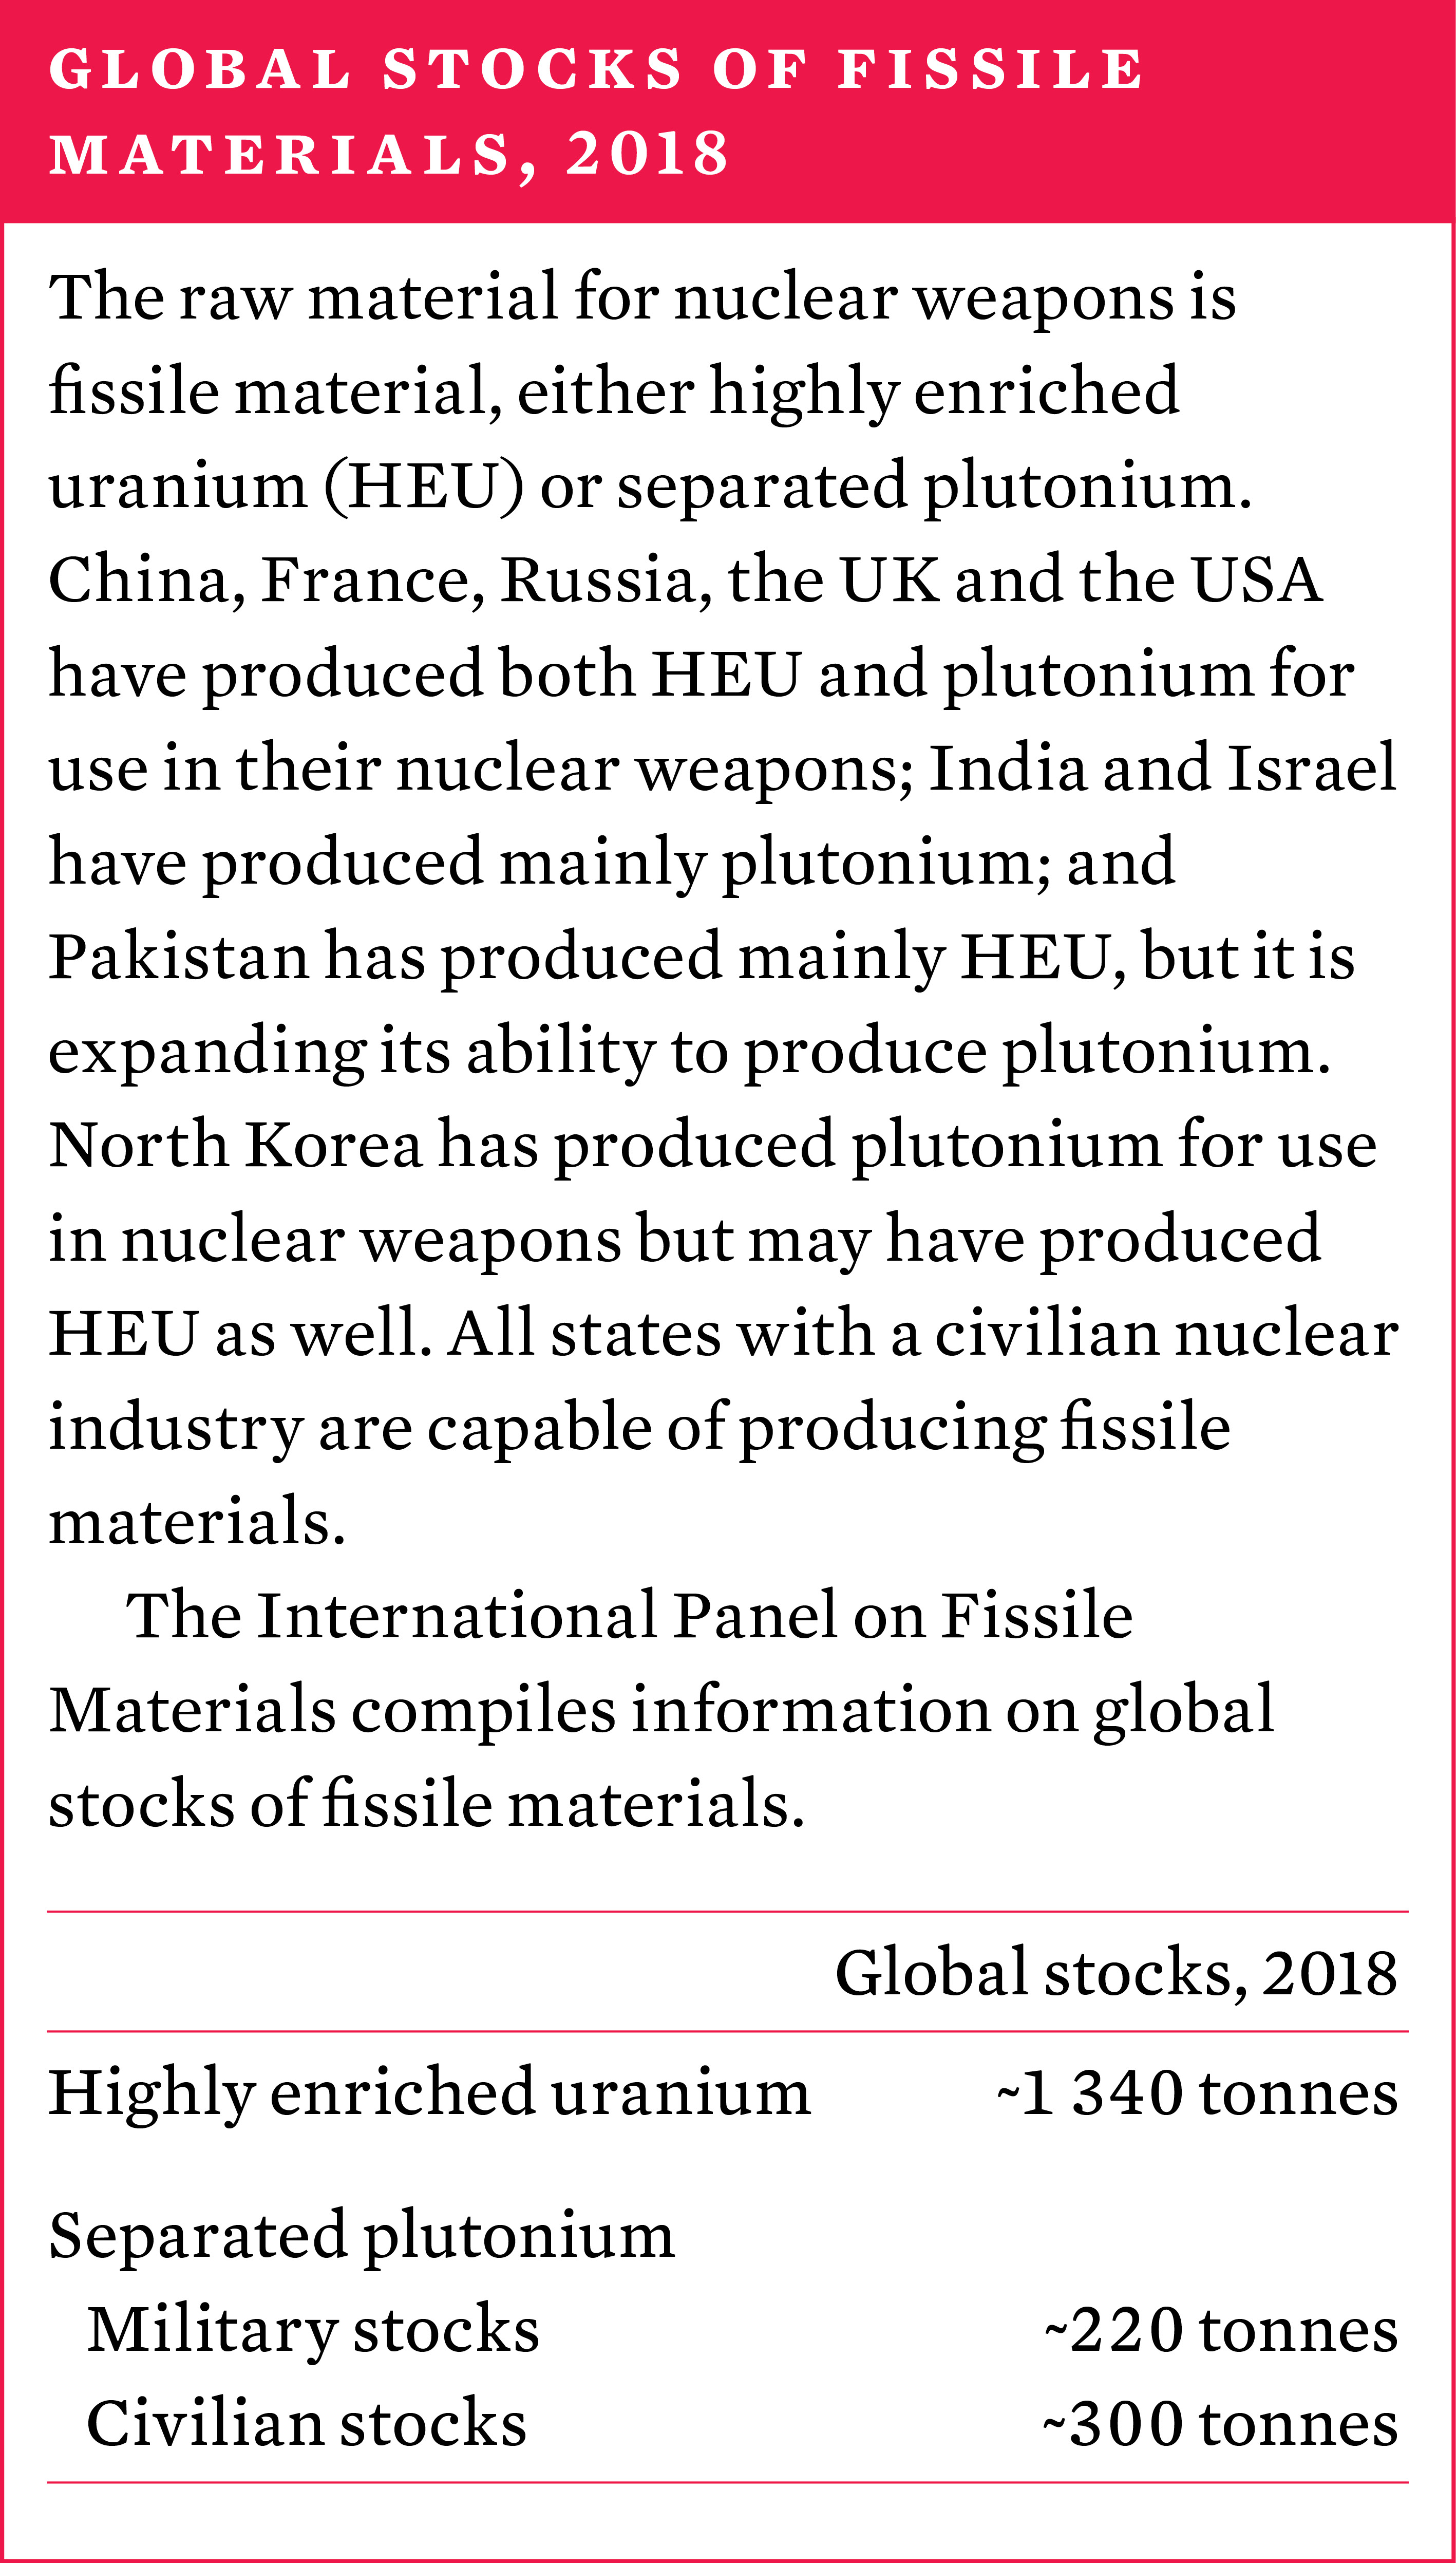 Global stocks of fissile materials 2018